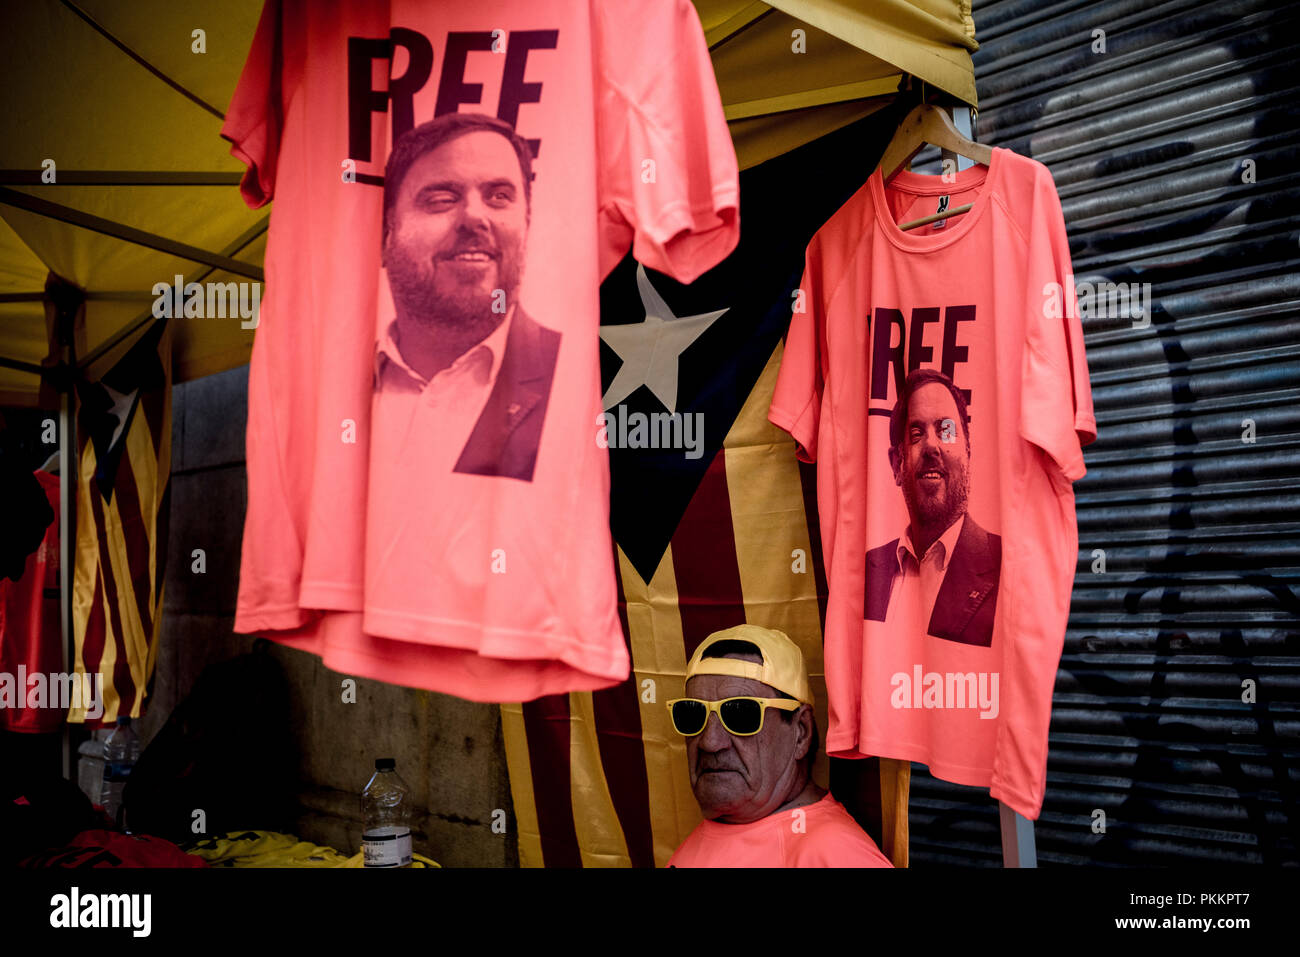 T-shirts demanding freedom for former Catalan vice-president ORIOL JUNQUERAS are displayed in a stall during La Diada in Barcelona.  Catalans celebrate La Diada or Catalonia National Day in an atmosphere of conflict with the Spanish Government for the imprisoned independentist leaders and proclamations in favor of independence. Stock Photo